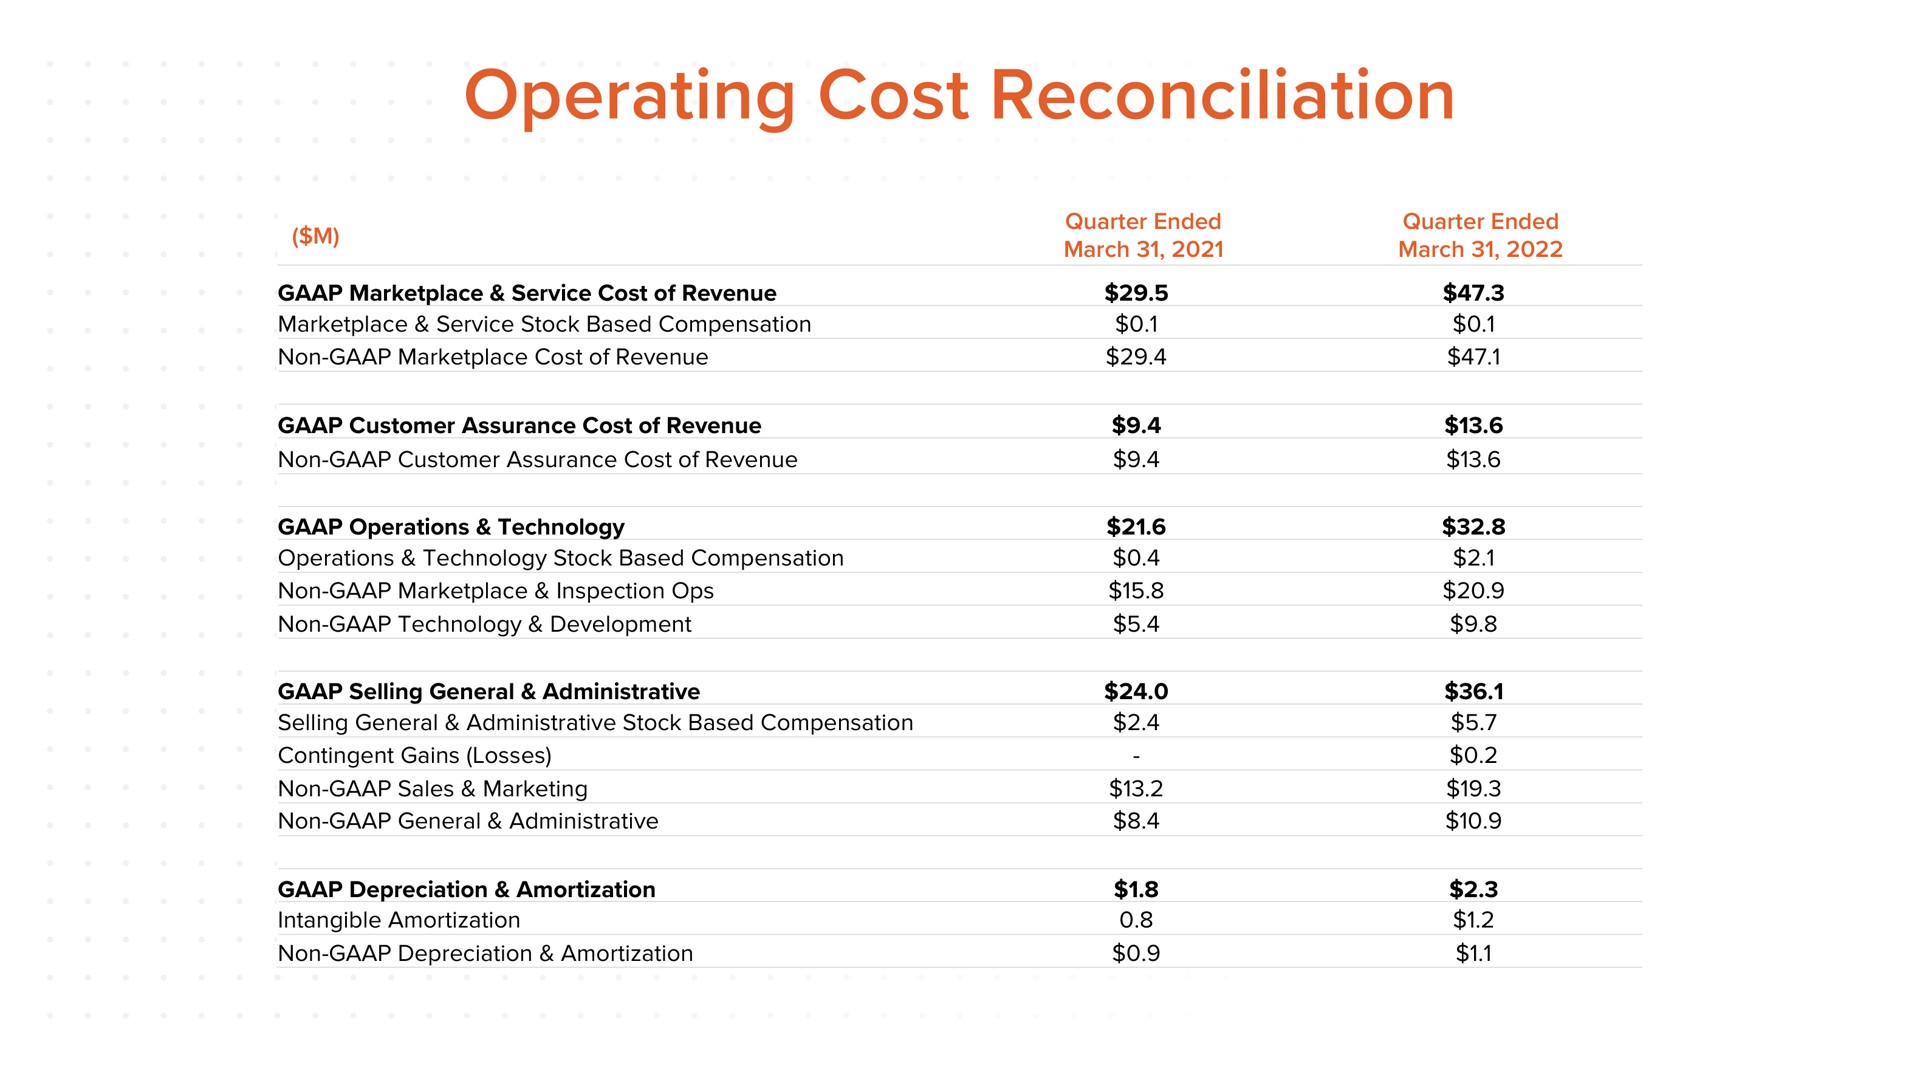 operating cost reconciliation | ACV Auctions